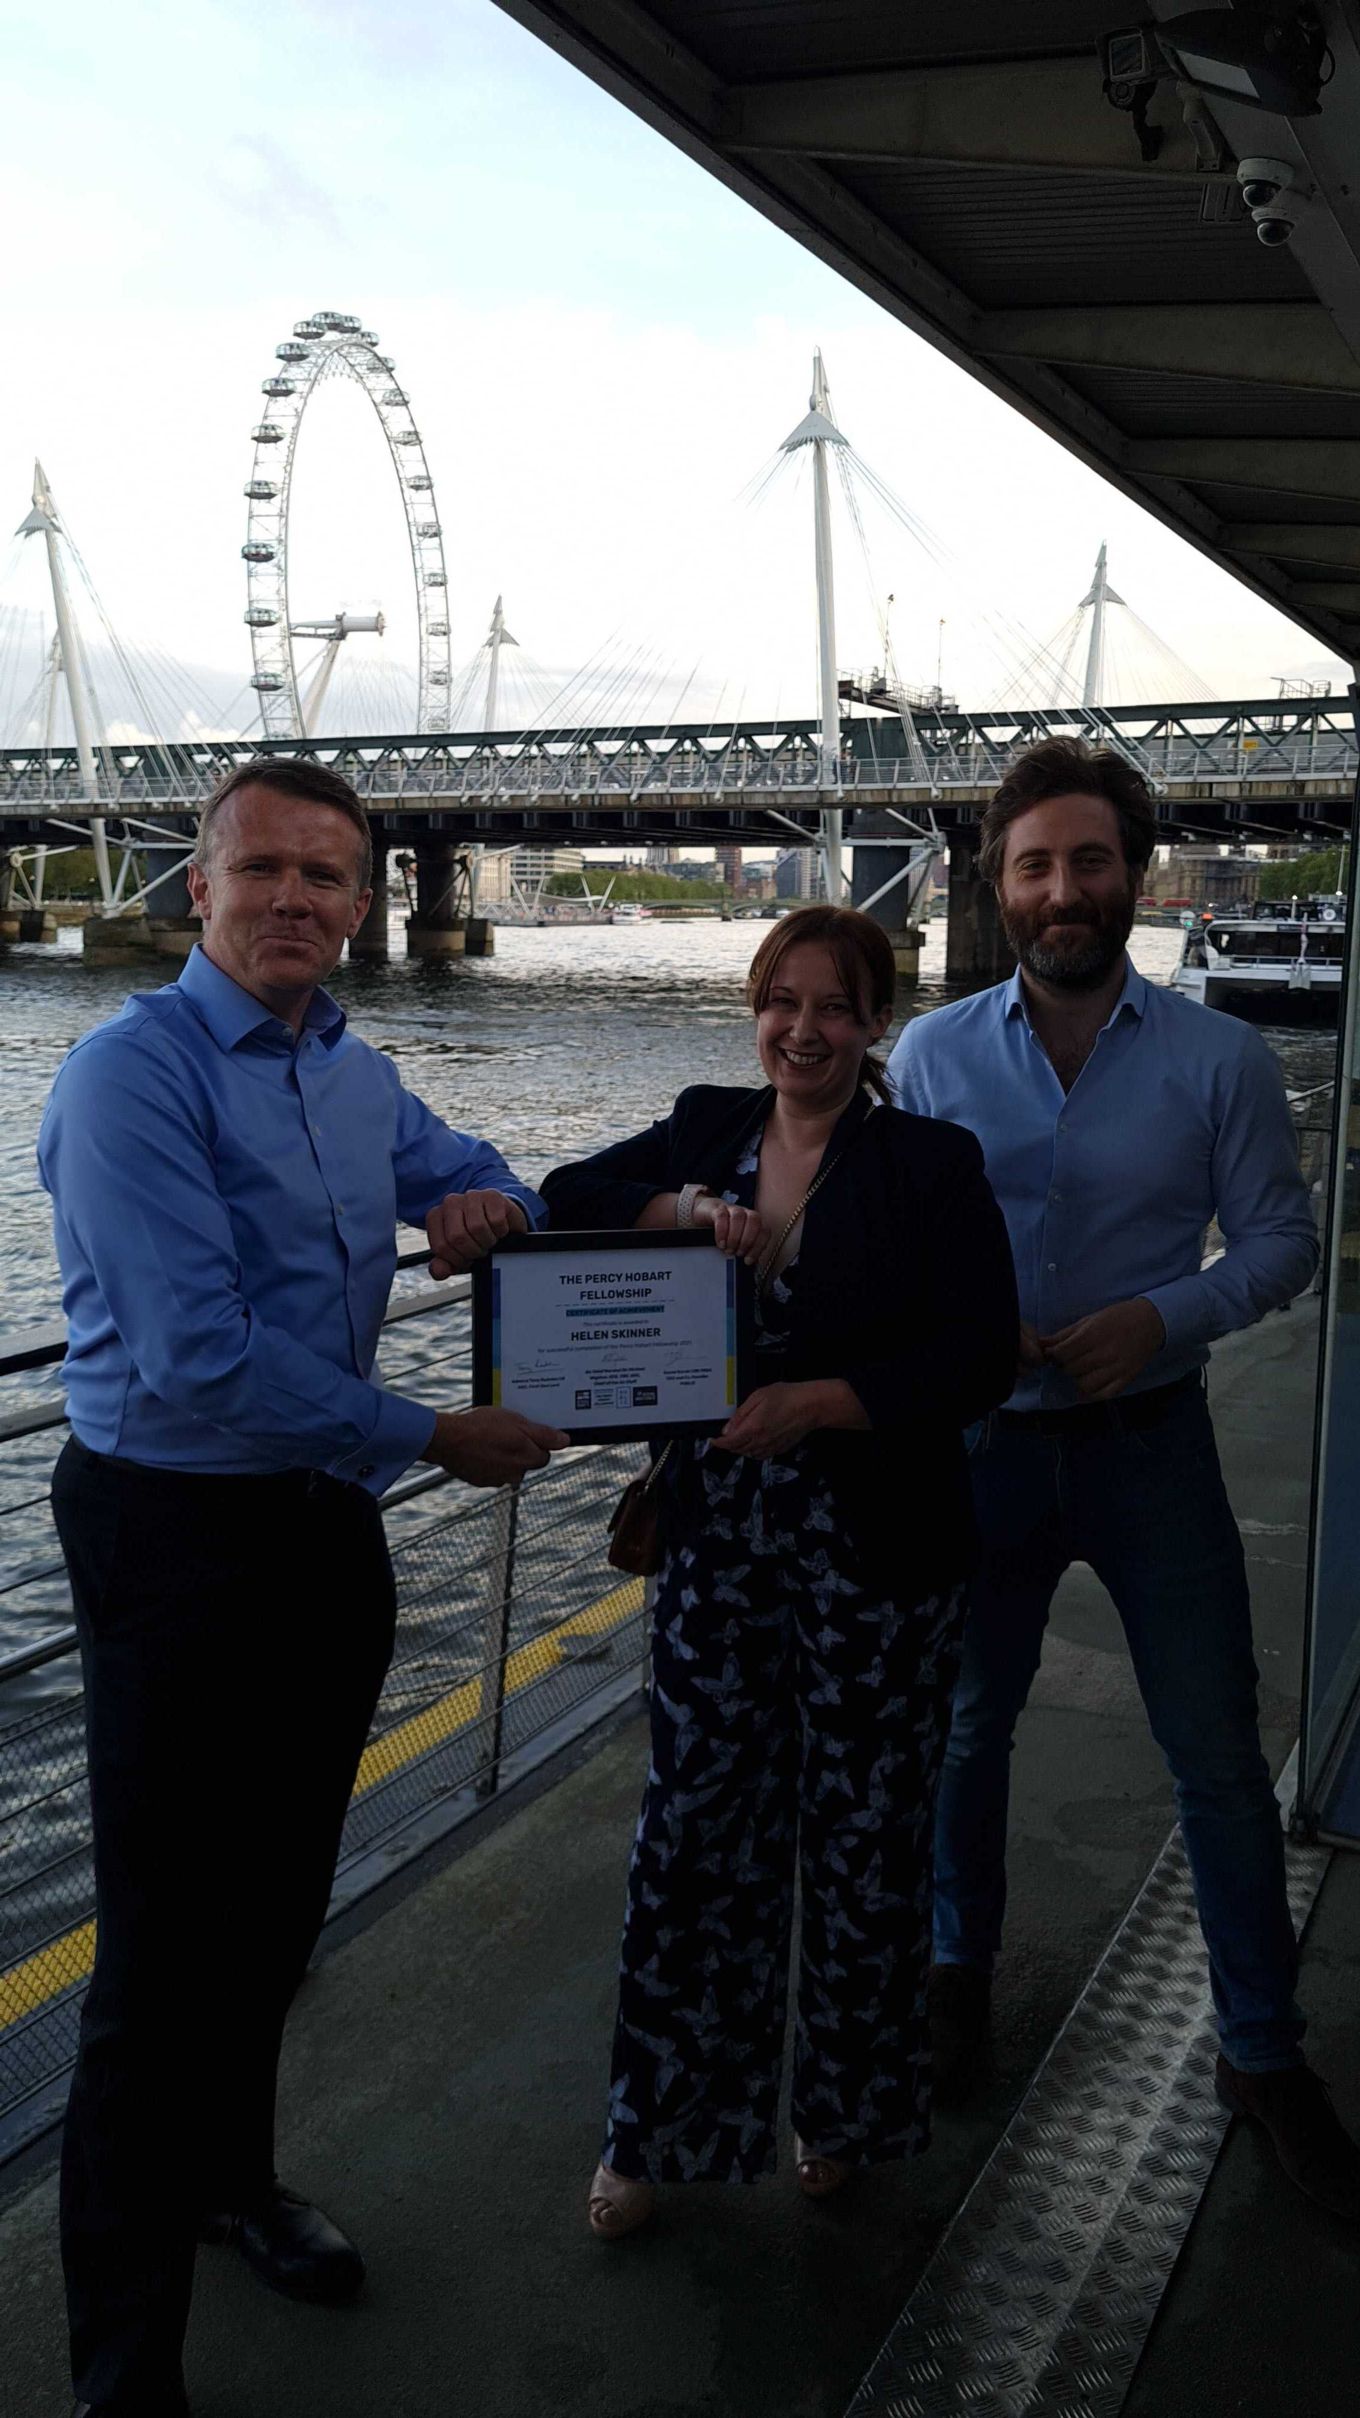 Three people on the course holding a framed certificate, in-front of the London Eye and Thames.